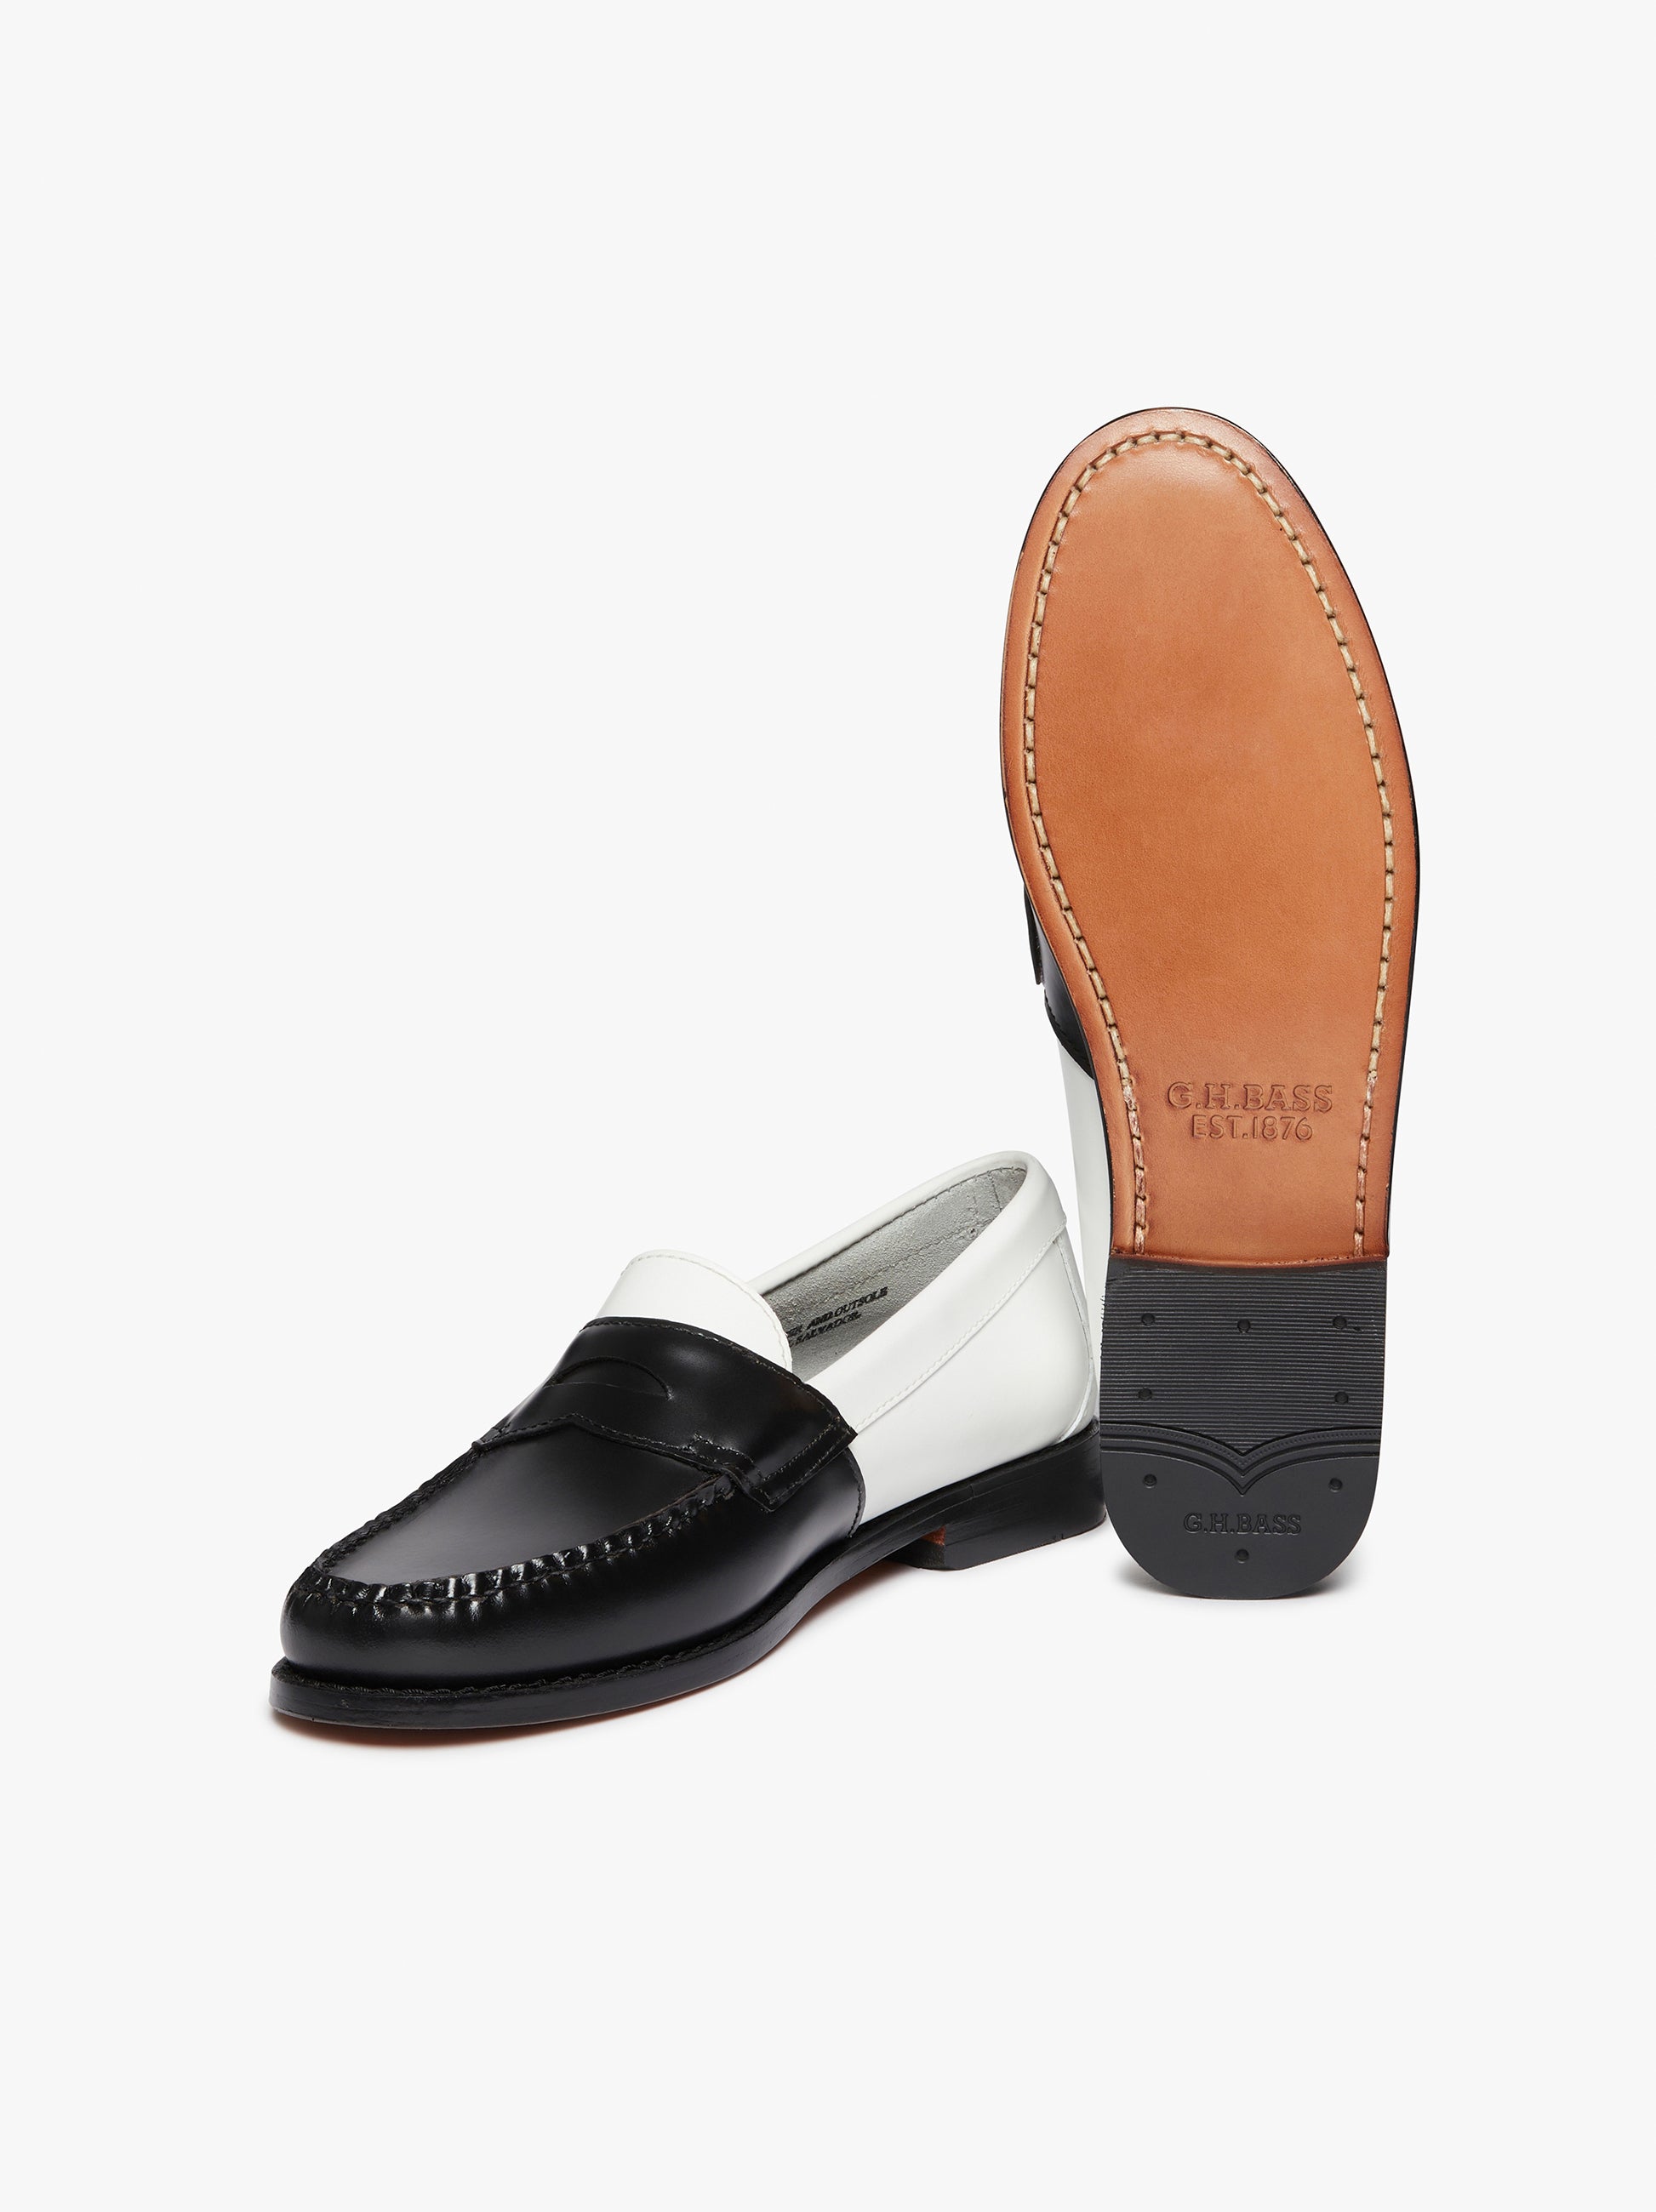 Weejuns Two Tone Penny Loafers – G.H.BASS 1876